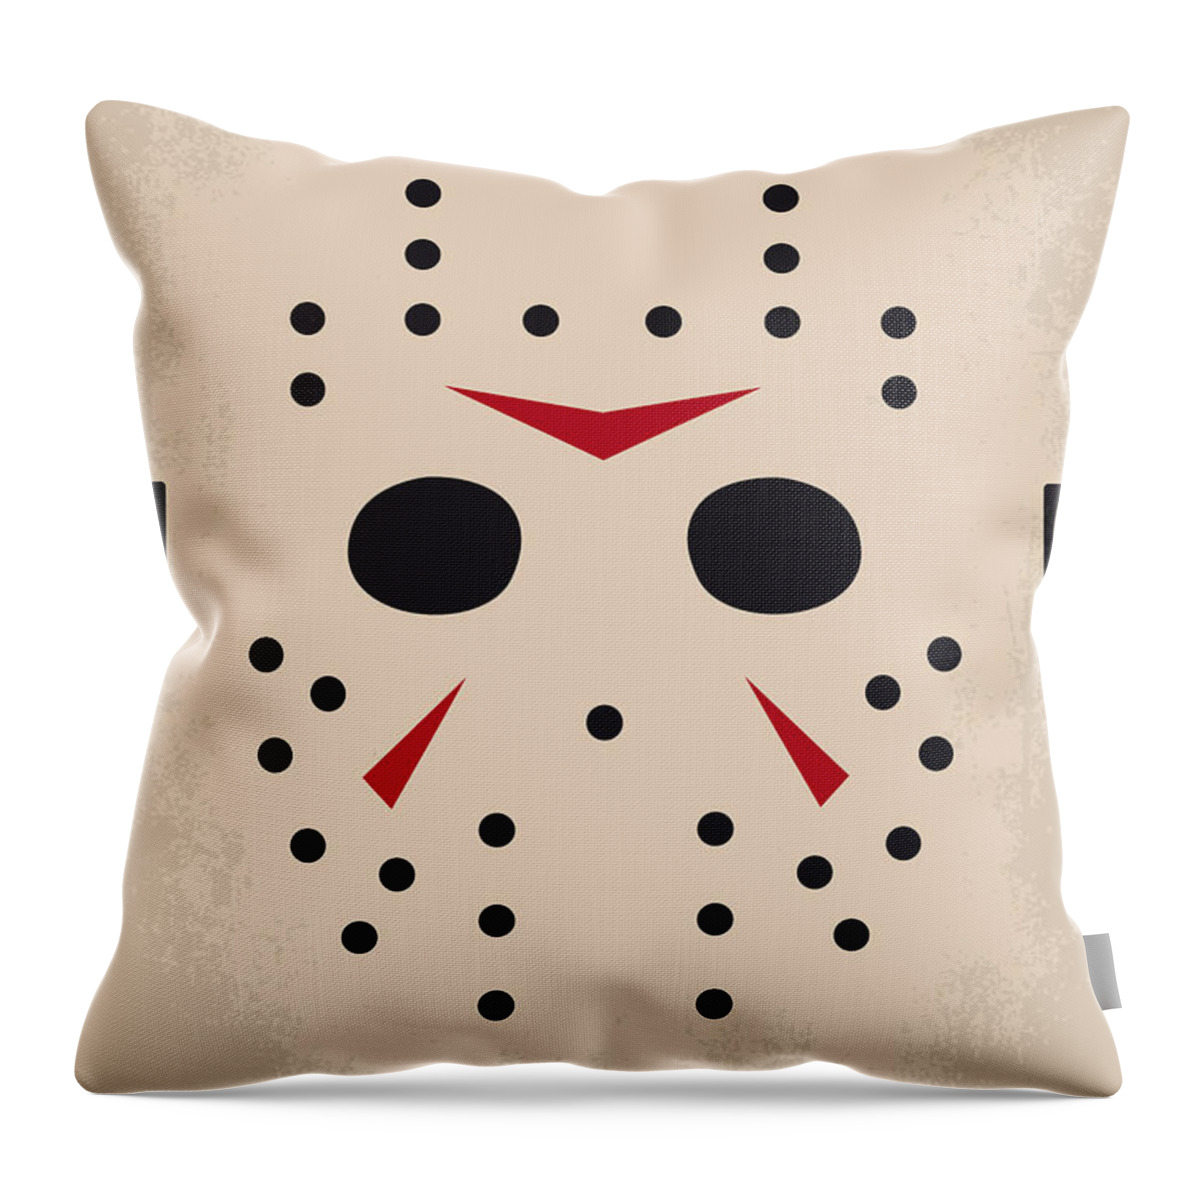 Friday The 13th Throw Pillow featuring the digital art No449 My Friday the 13th minimal movie poster by Chungkong Art